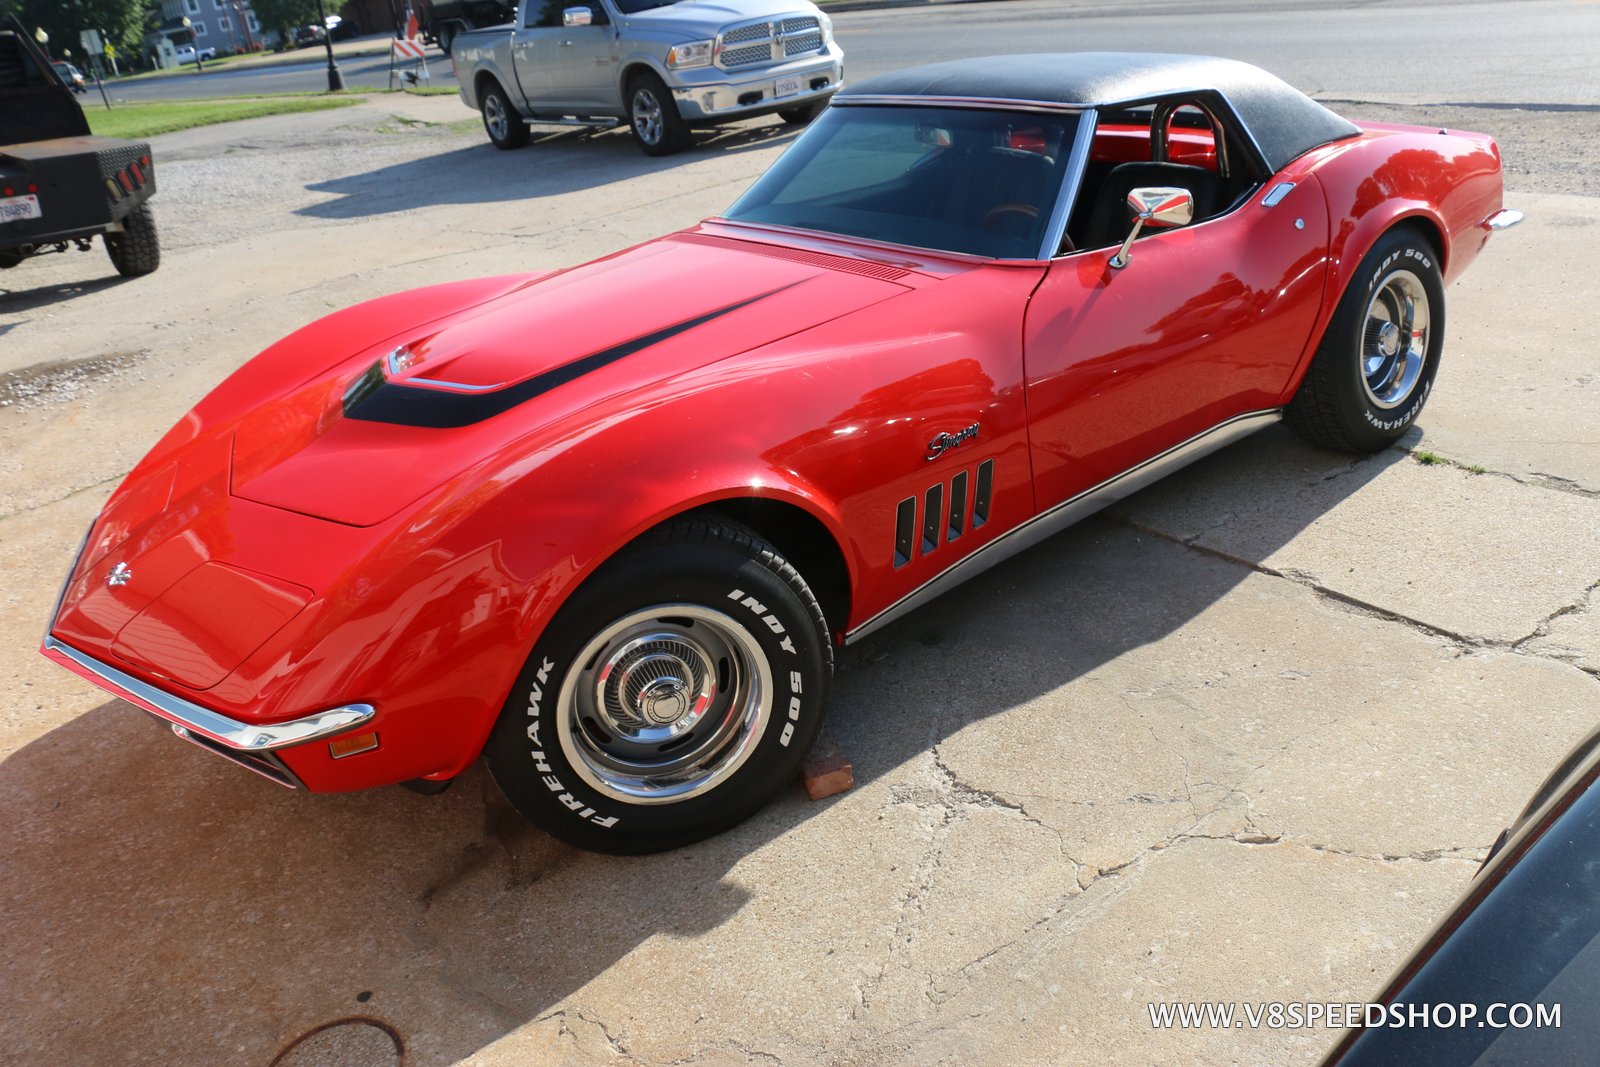 1969 Chevrolet Corvette Roadster 427 Swap at the V8 Speed and Resto Shop